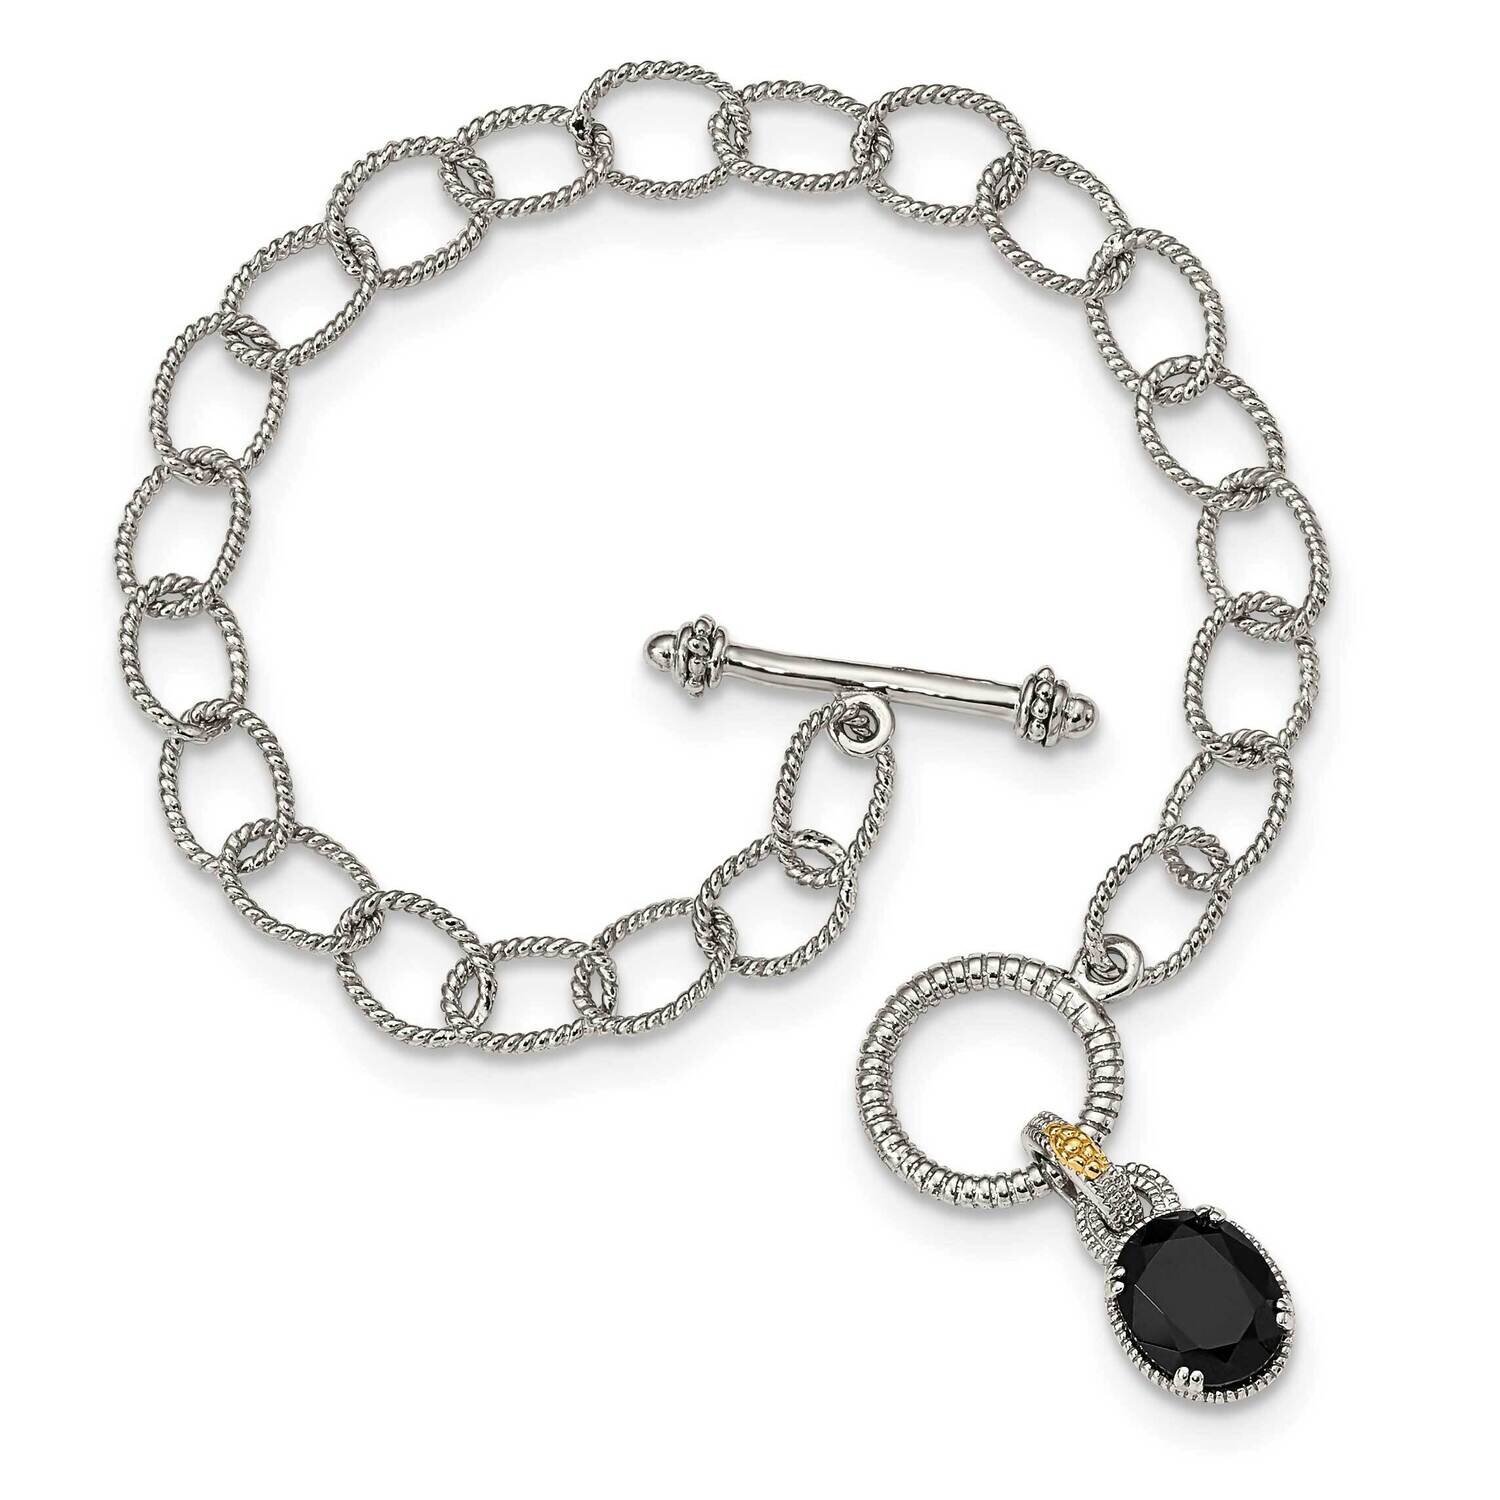 Onyx 7.5 Inch Toggle Bracelet Sterling Silver with 14k Gold Accent QTC1538